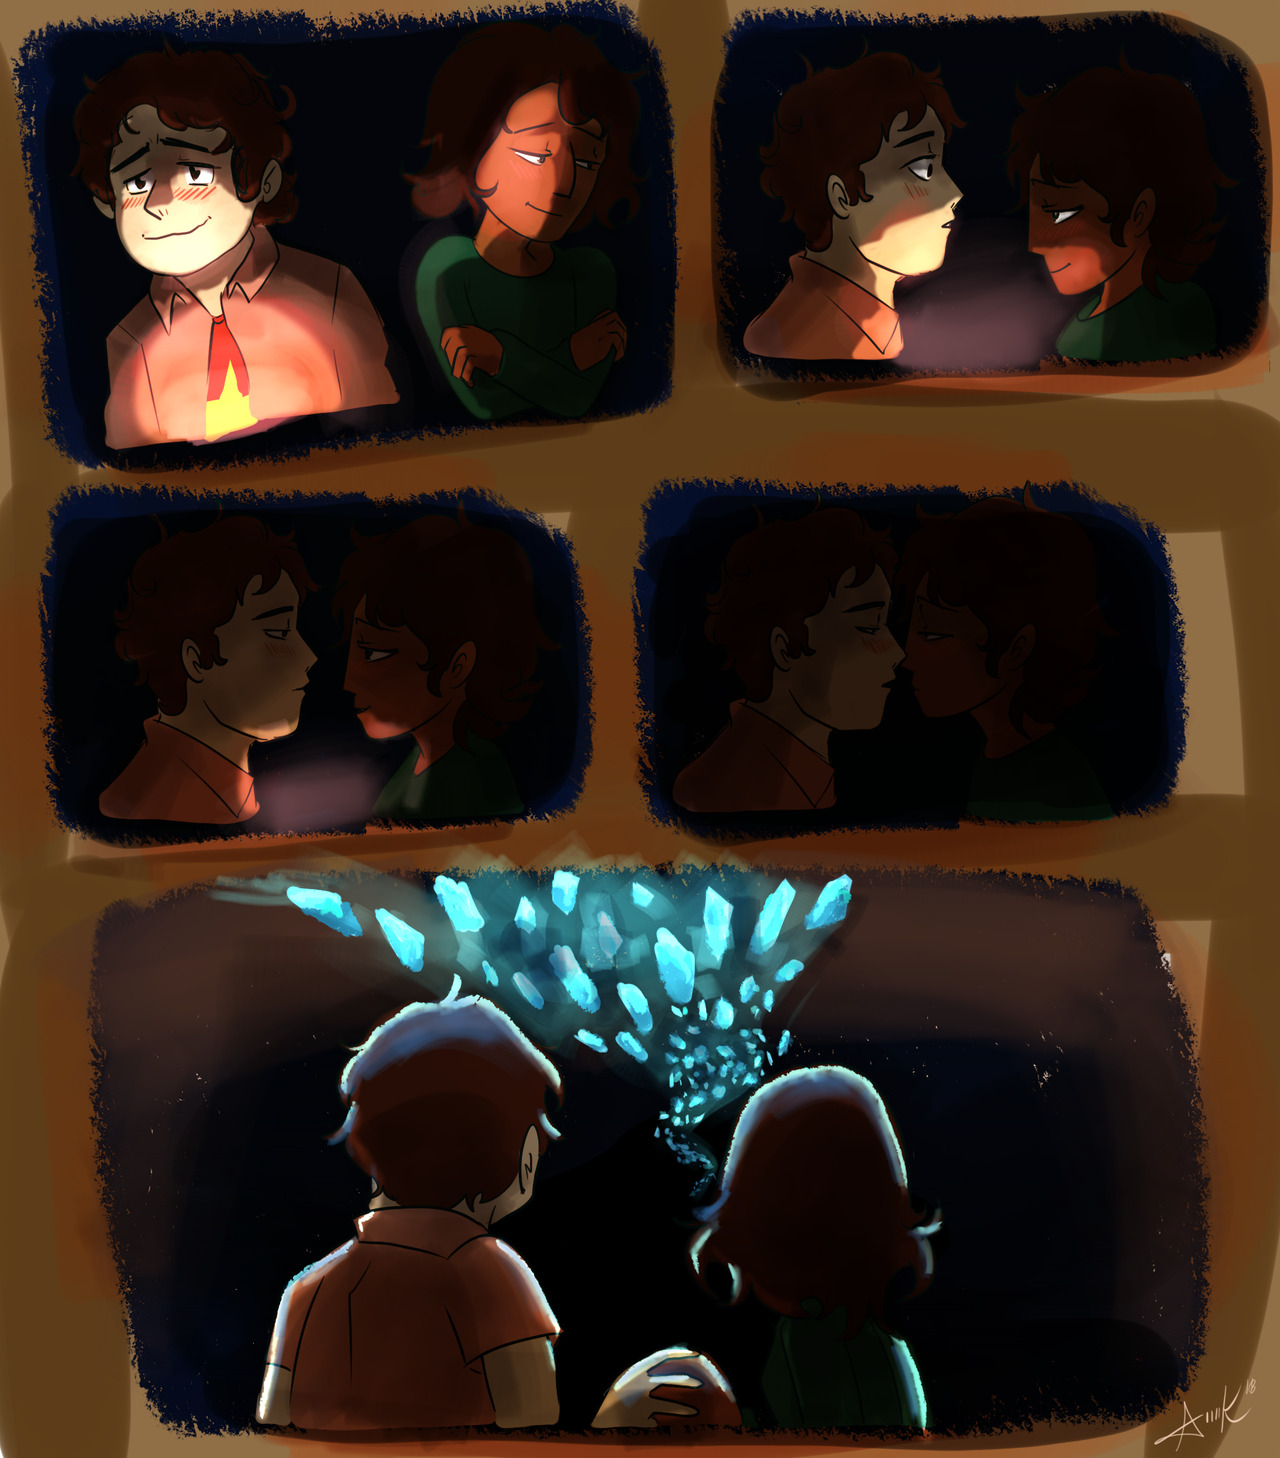 Based on the scene “The cave of two lovers….” from Avatar The last airbender